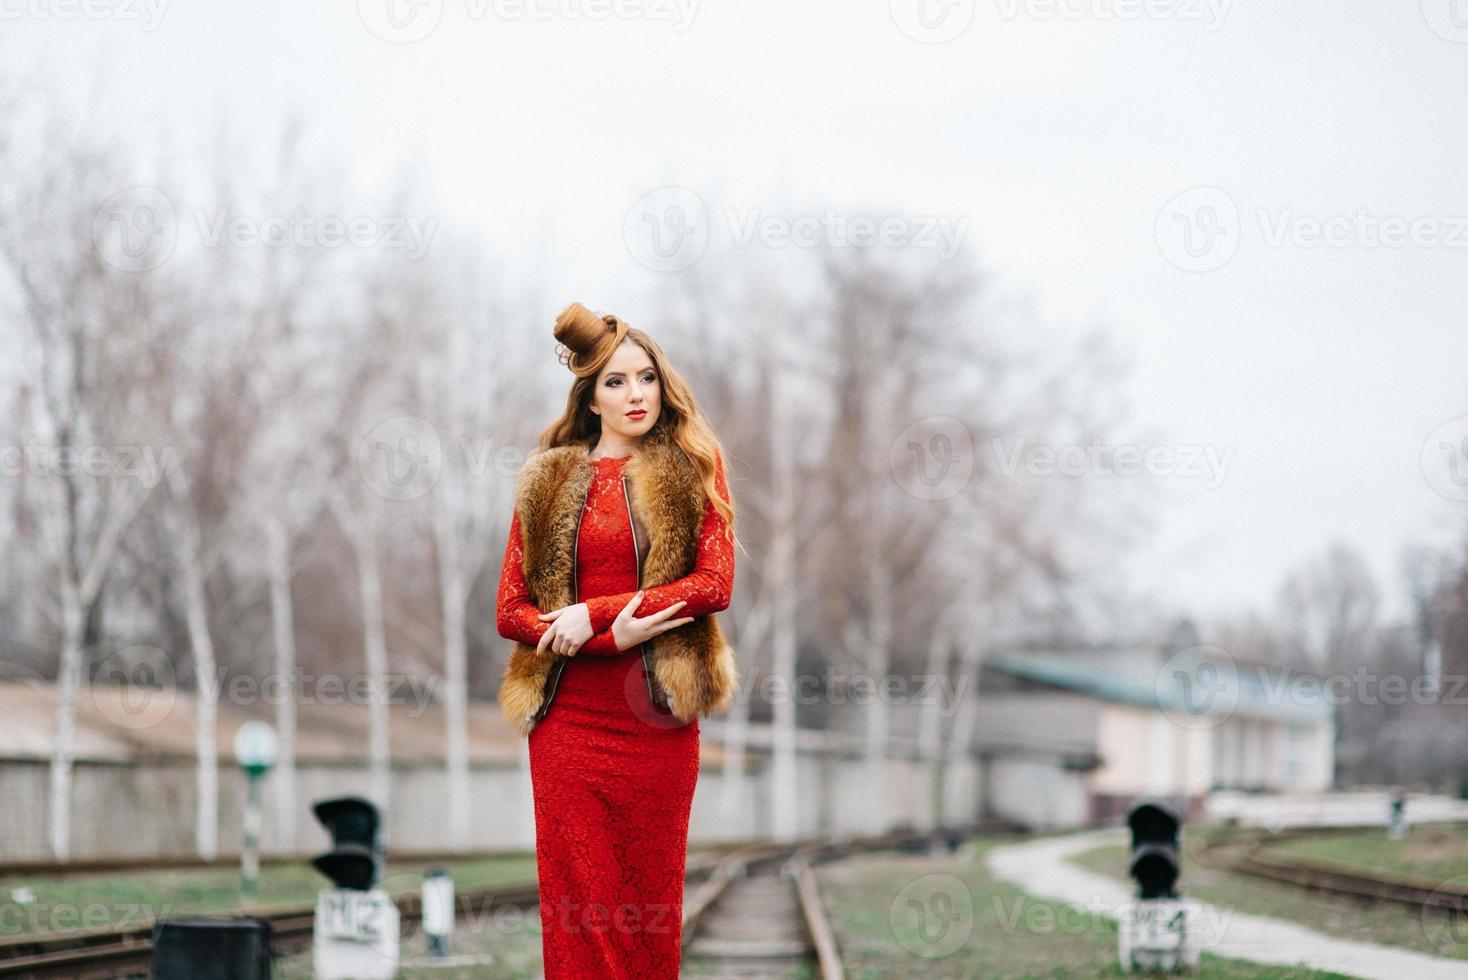 Young girl with red hair in a bright red dress on the railway tracks photo